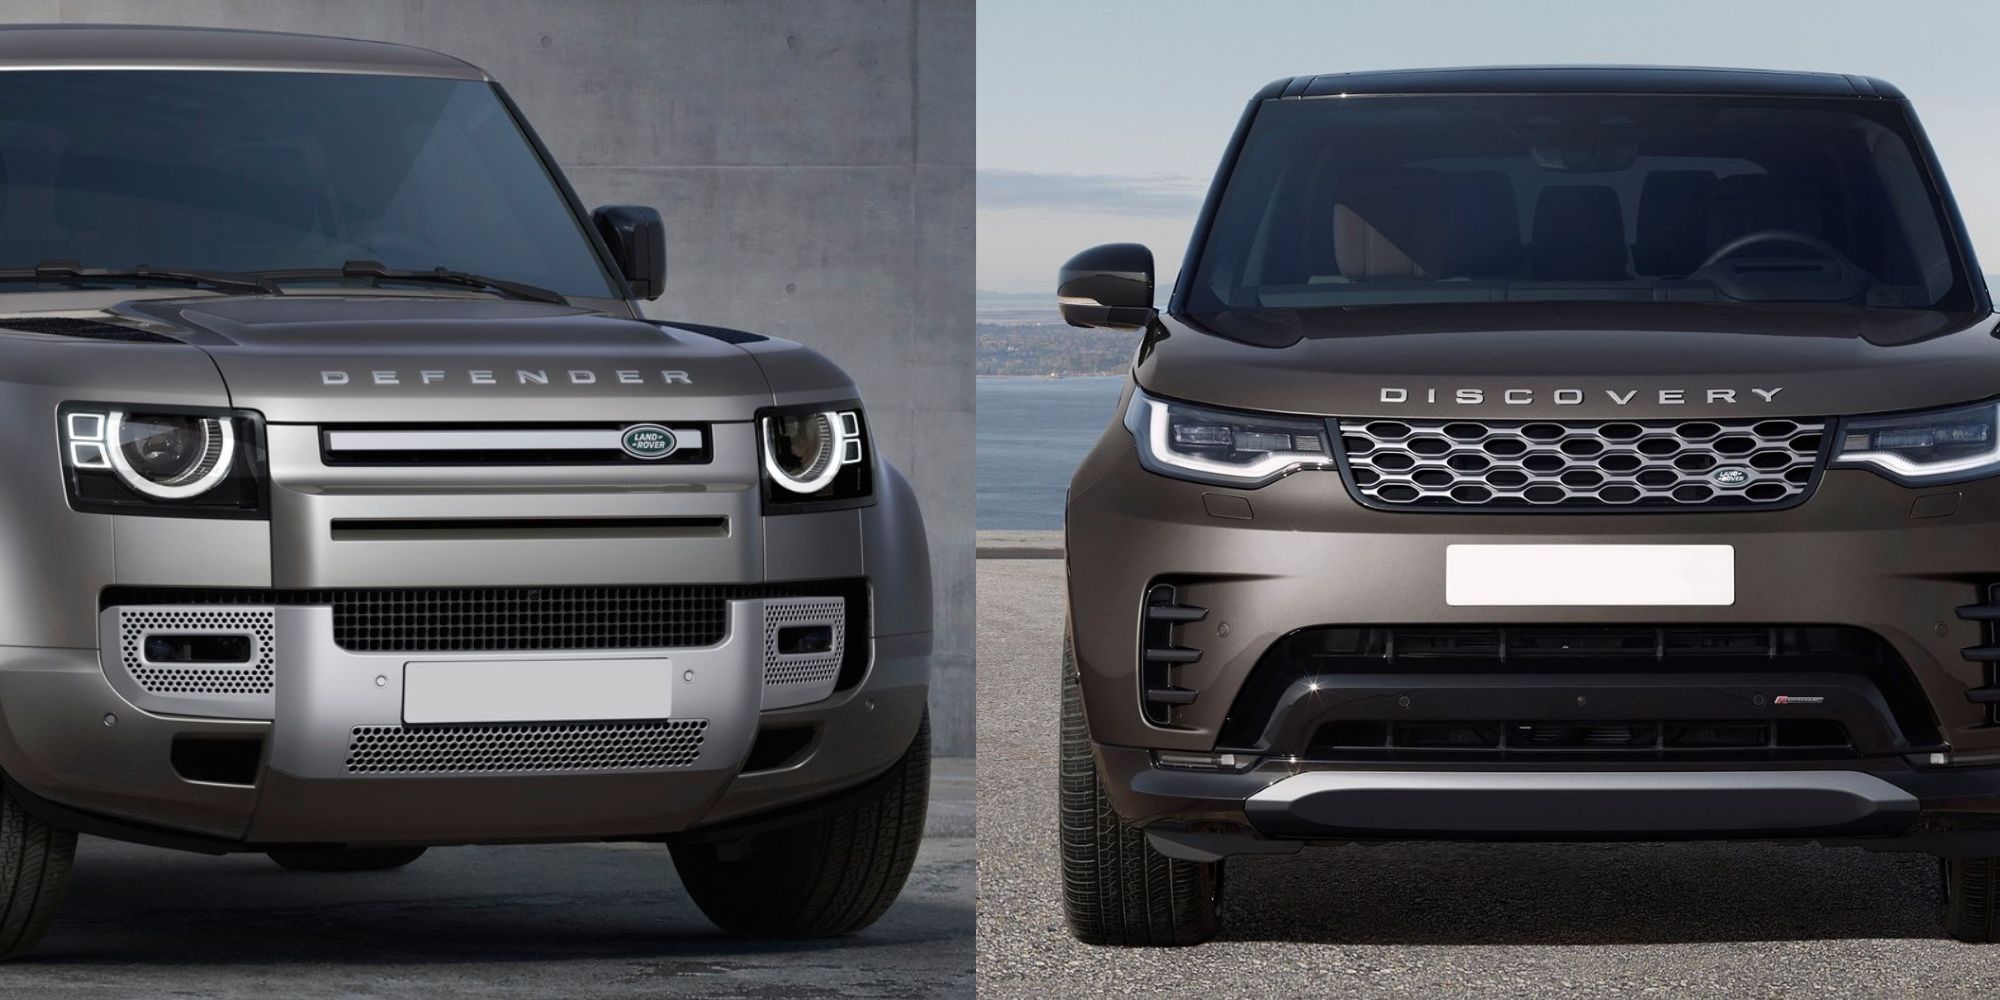 Land Rover vs. Range Rover: What's the Difference?